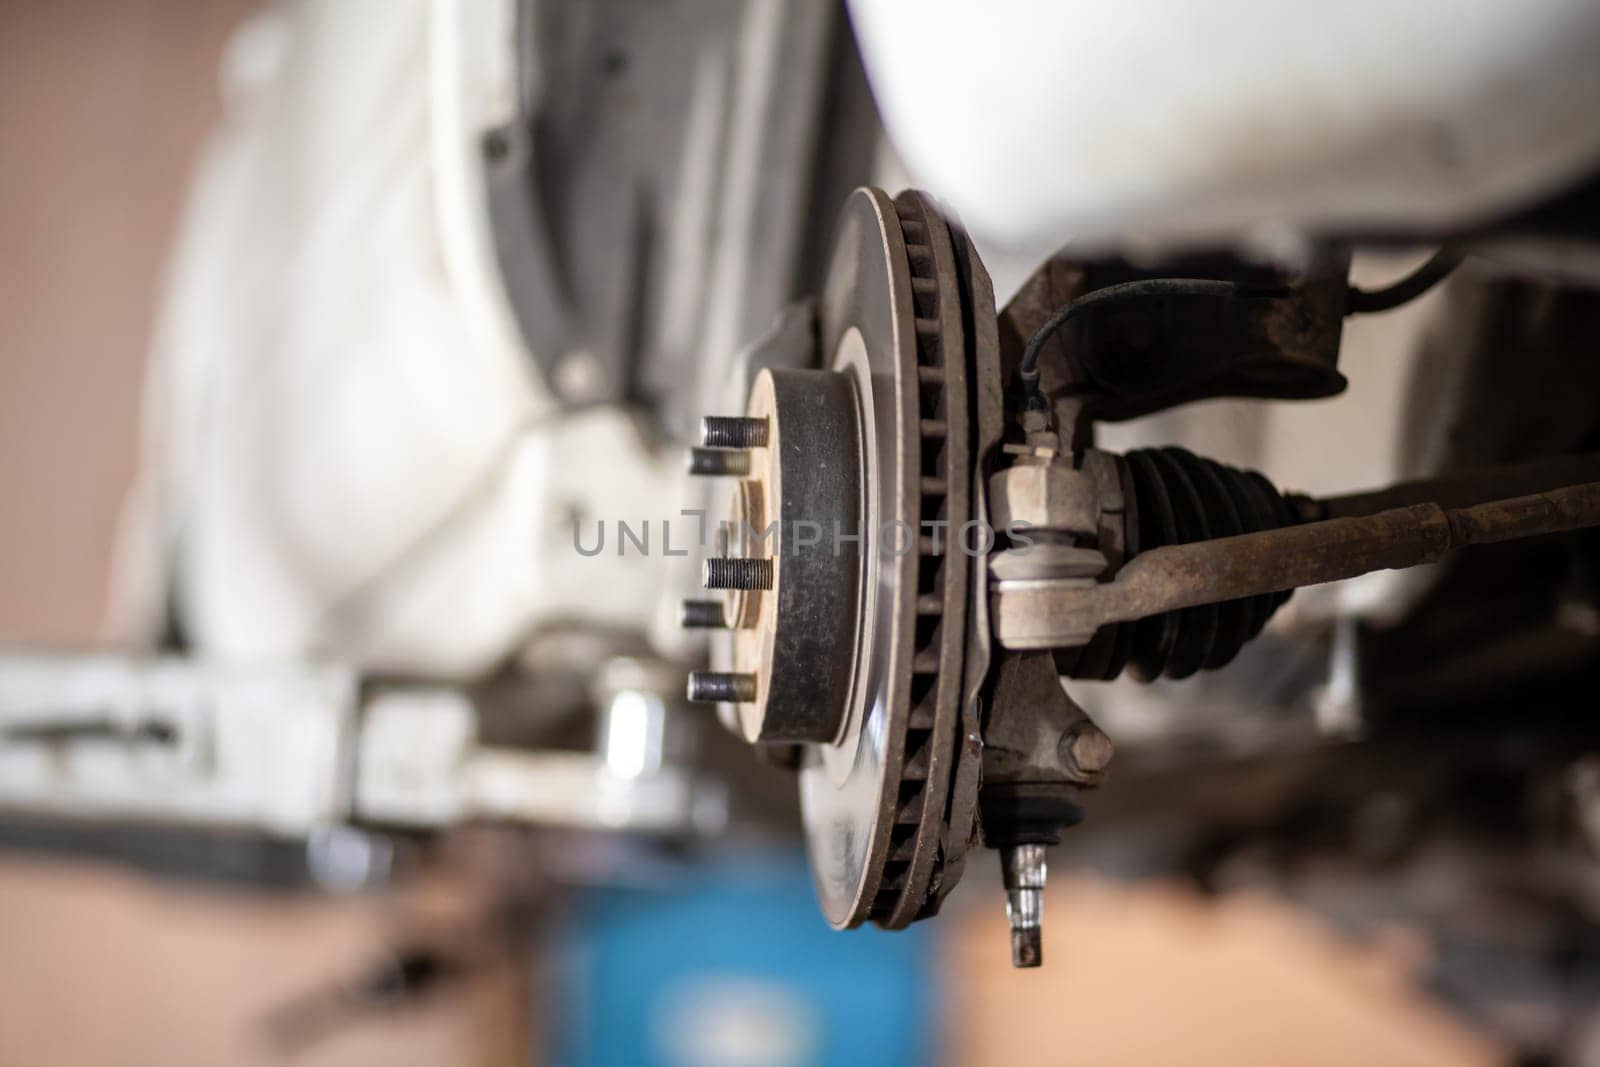 Disc brake of the vehicle for repair, in process of new tire replacement. Car brake repairing in garage.Suspension of car for maintenance brakes and shock absorber systems. Replacement of brake pads.